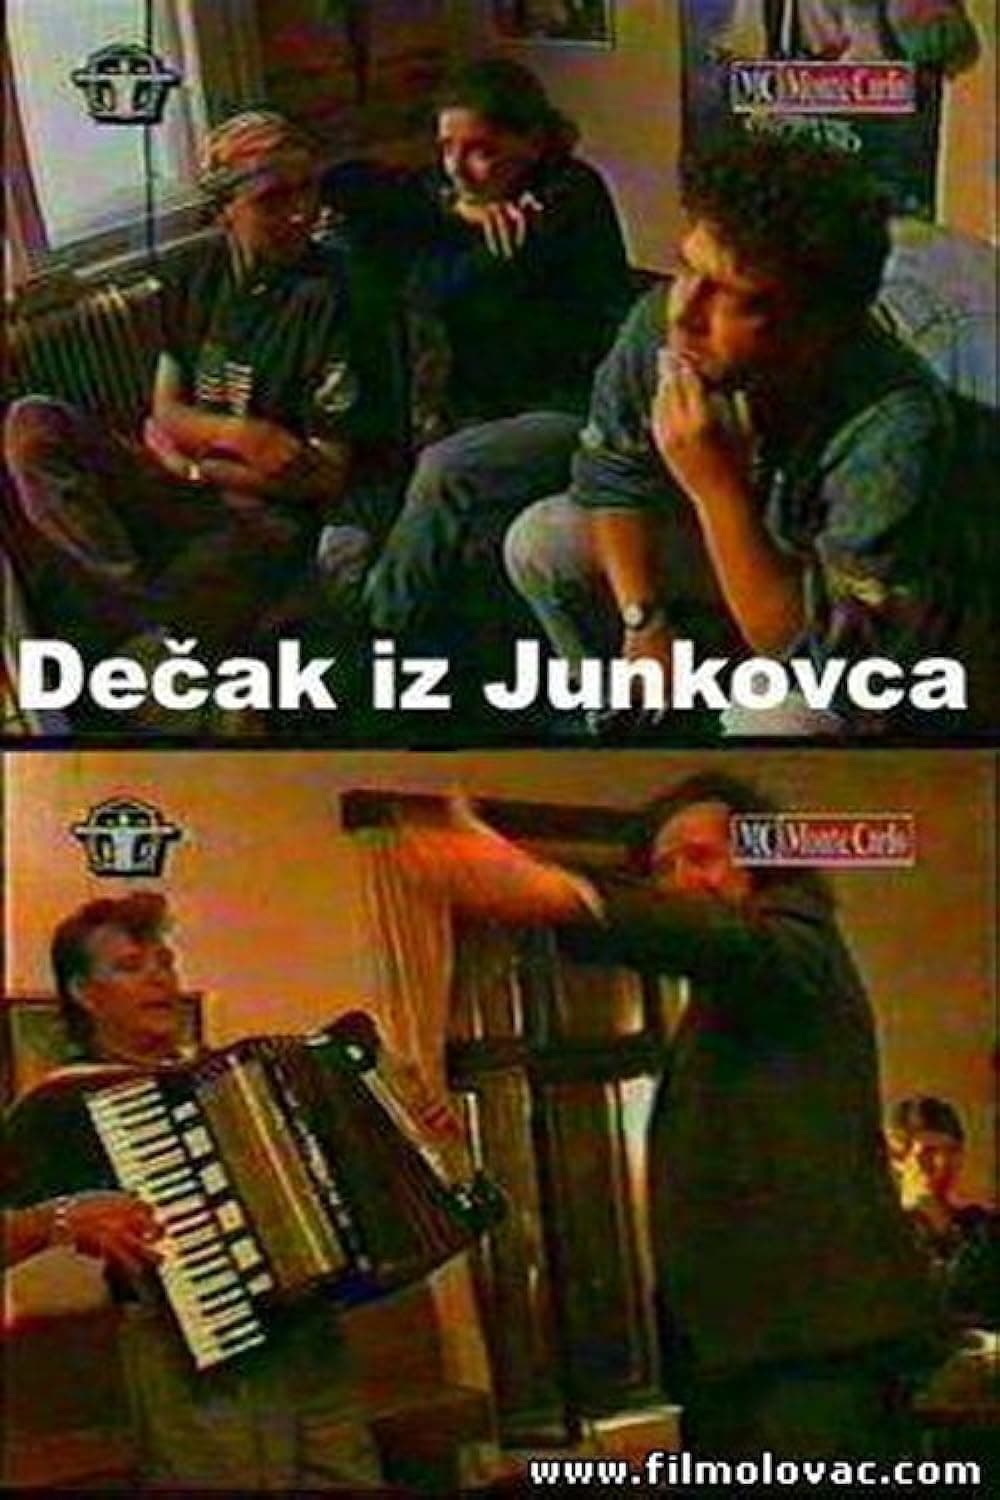 The Boy from Junkovac